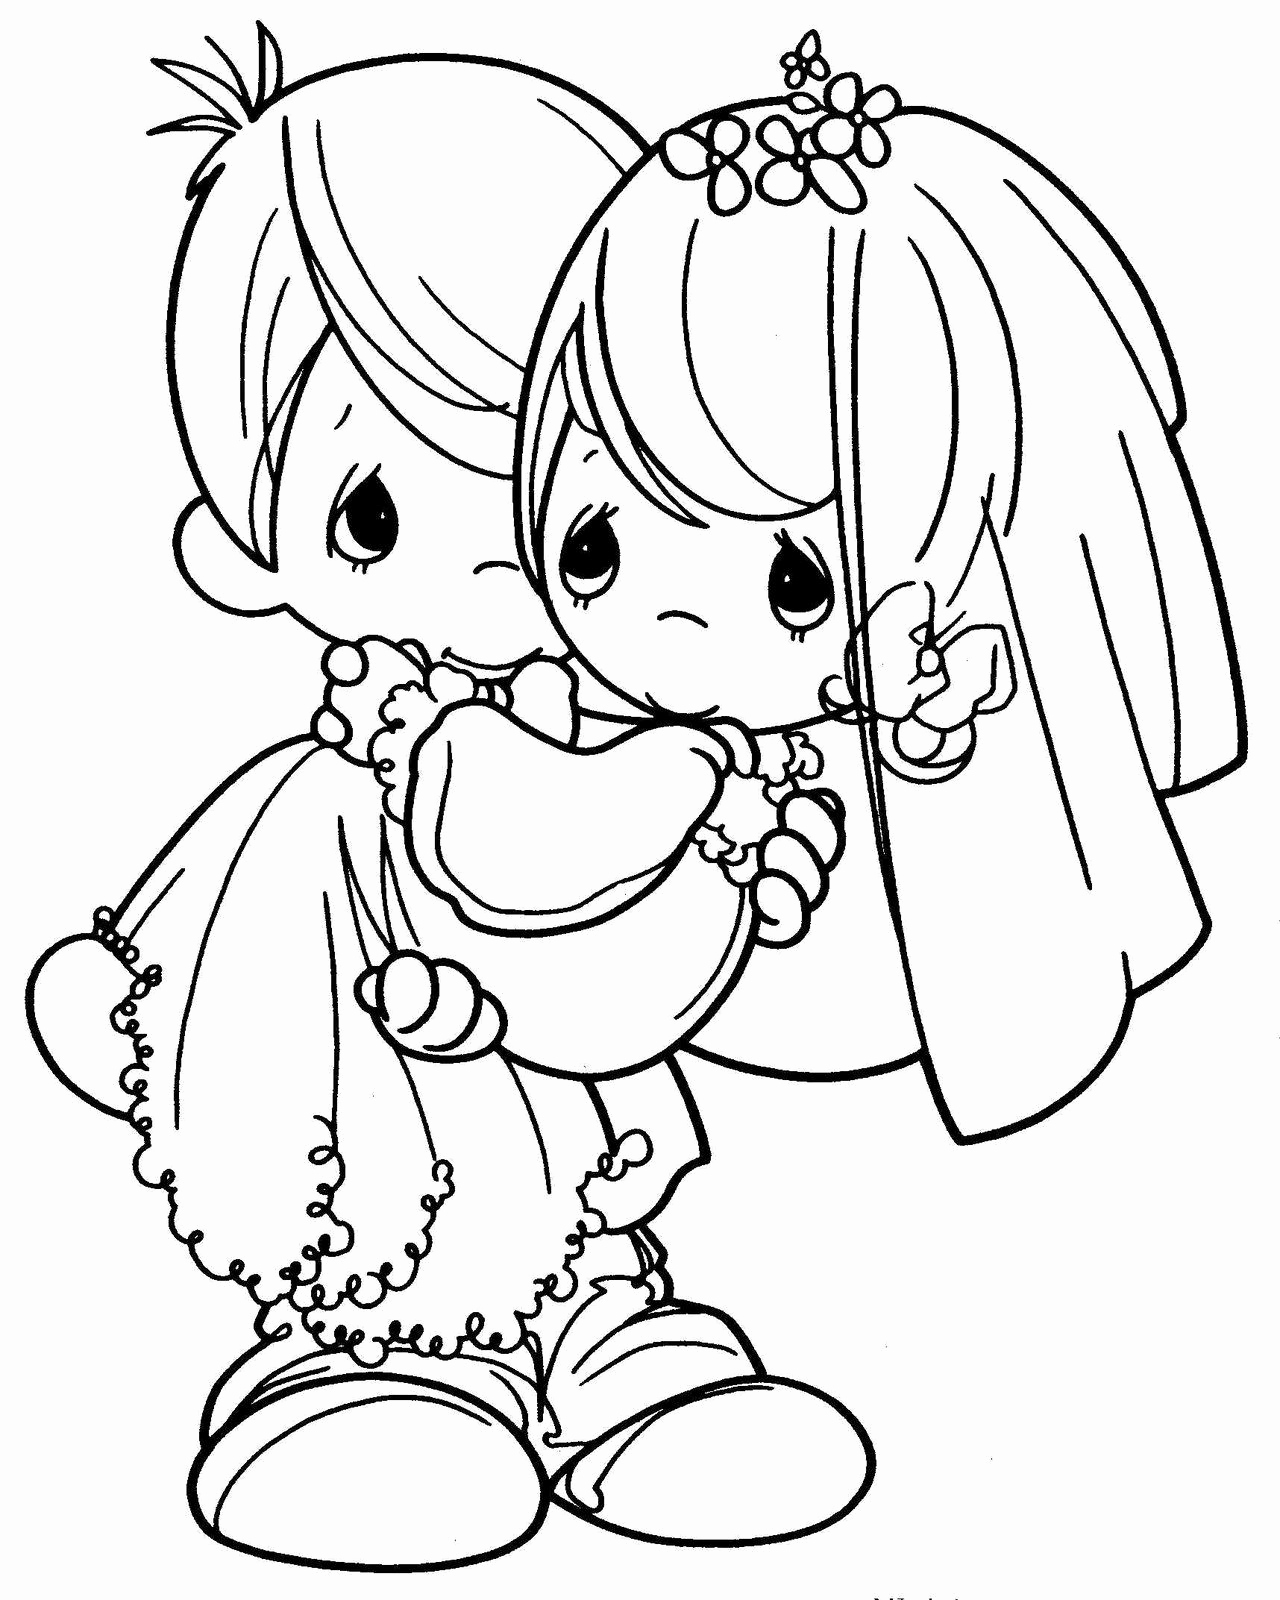 Wedding Coloring Pages To Printable Wedding Coloring Pages Doodle Art 